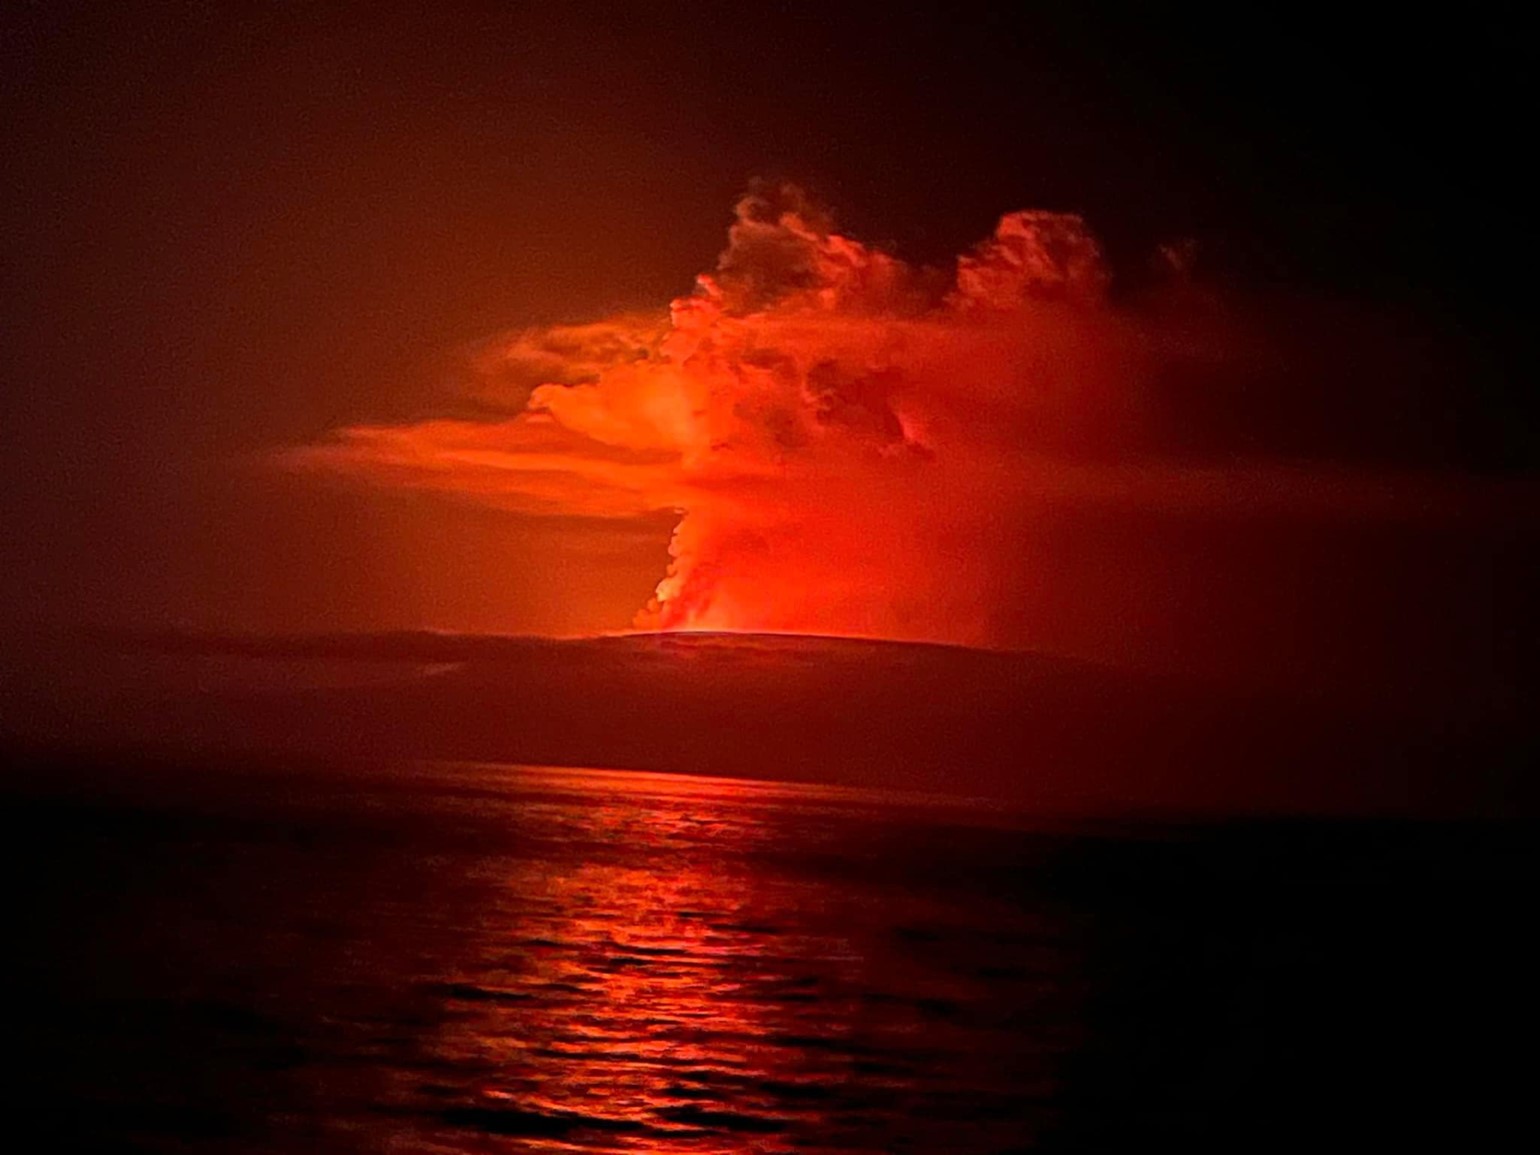 Glowing ash and lava explosion from an island in the ocean against a night sky